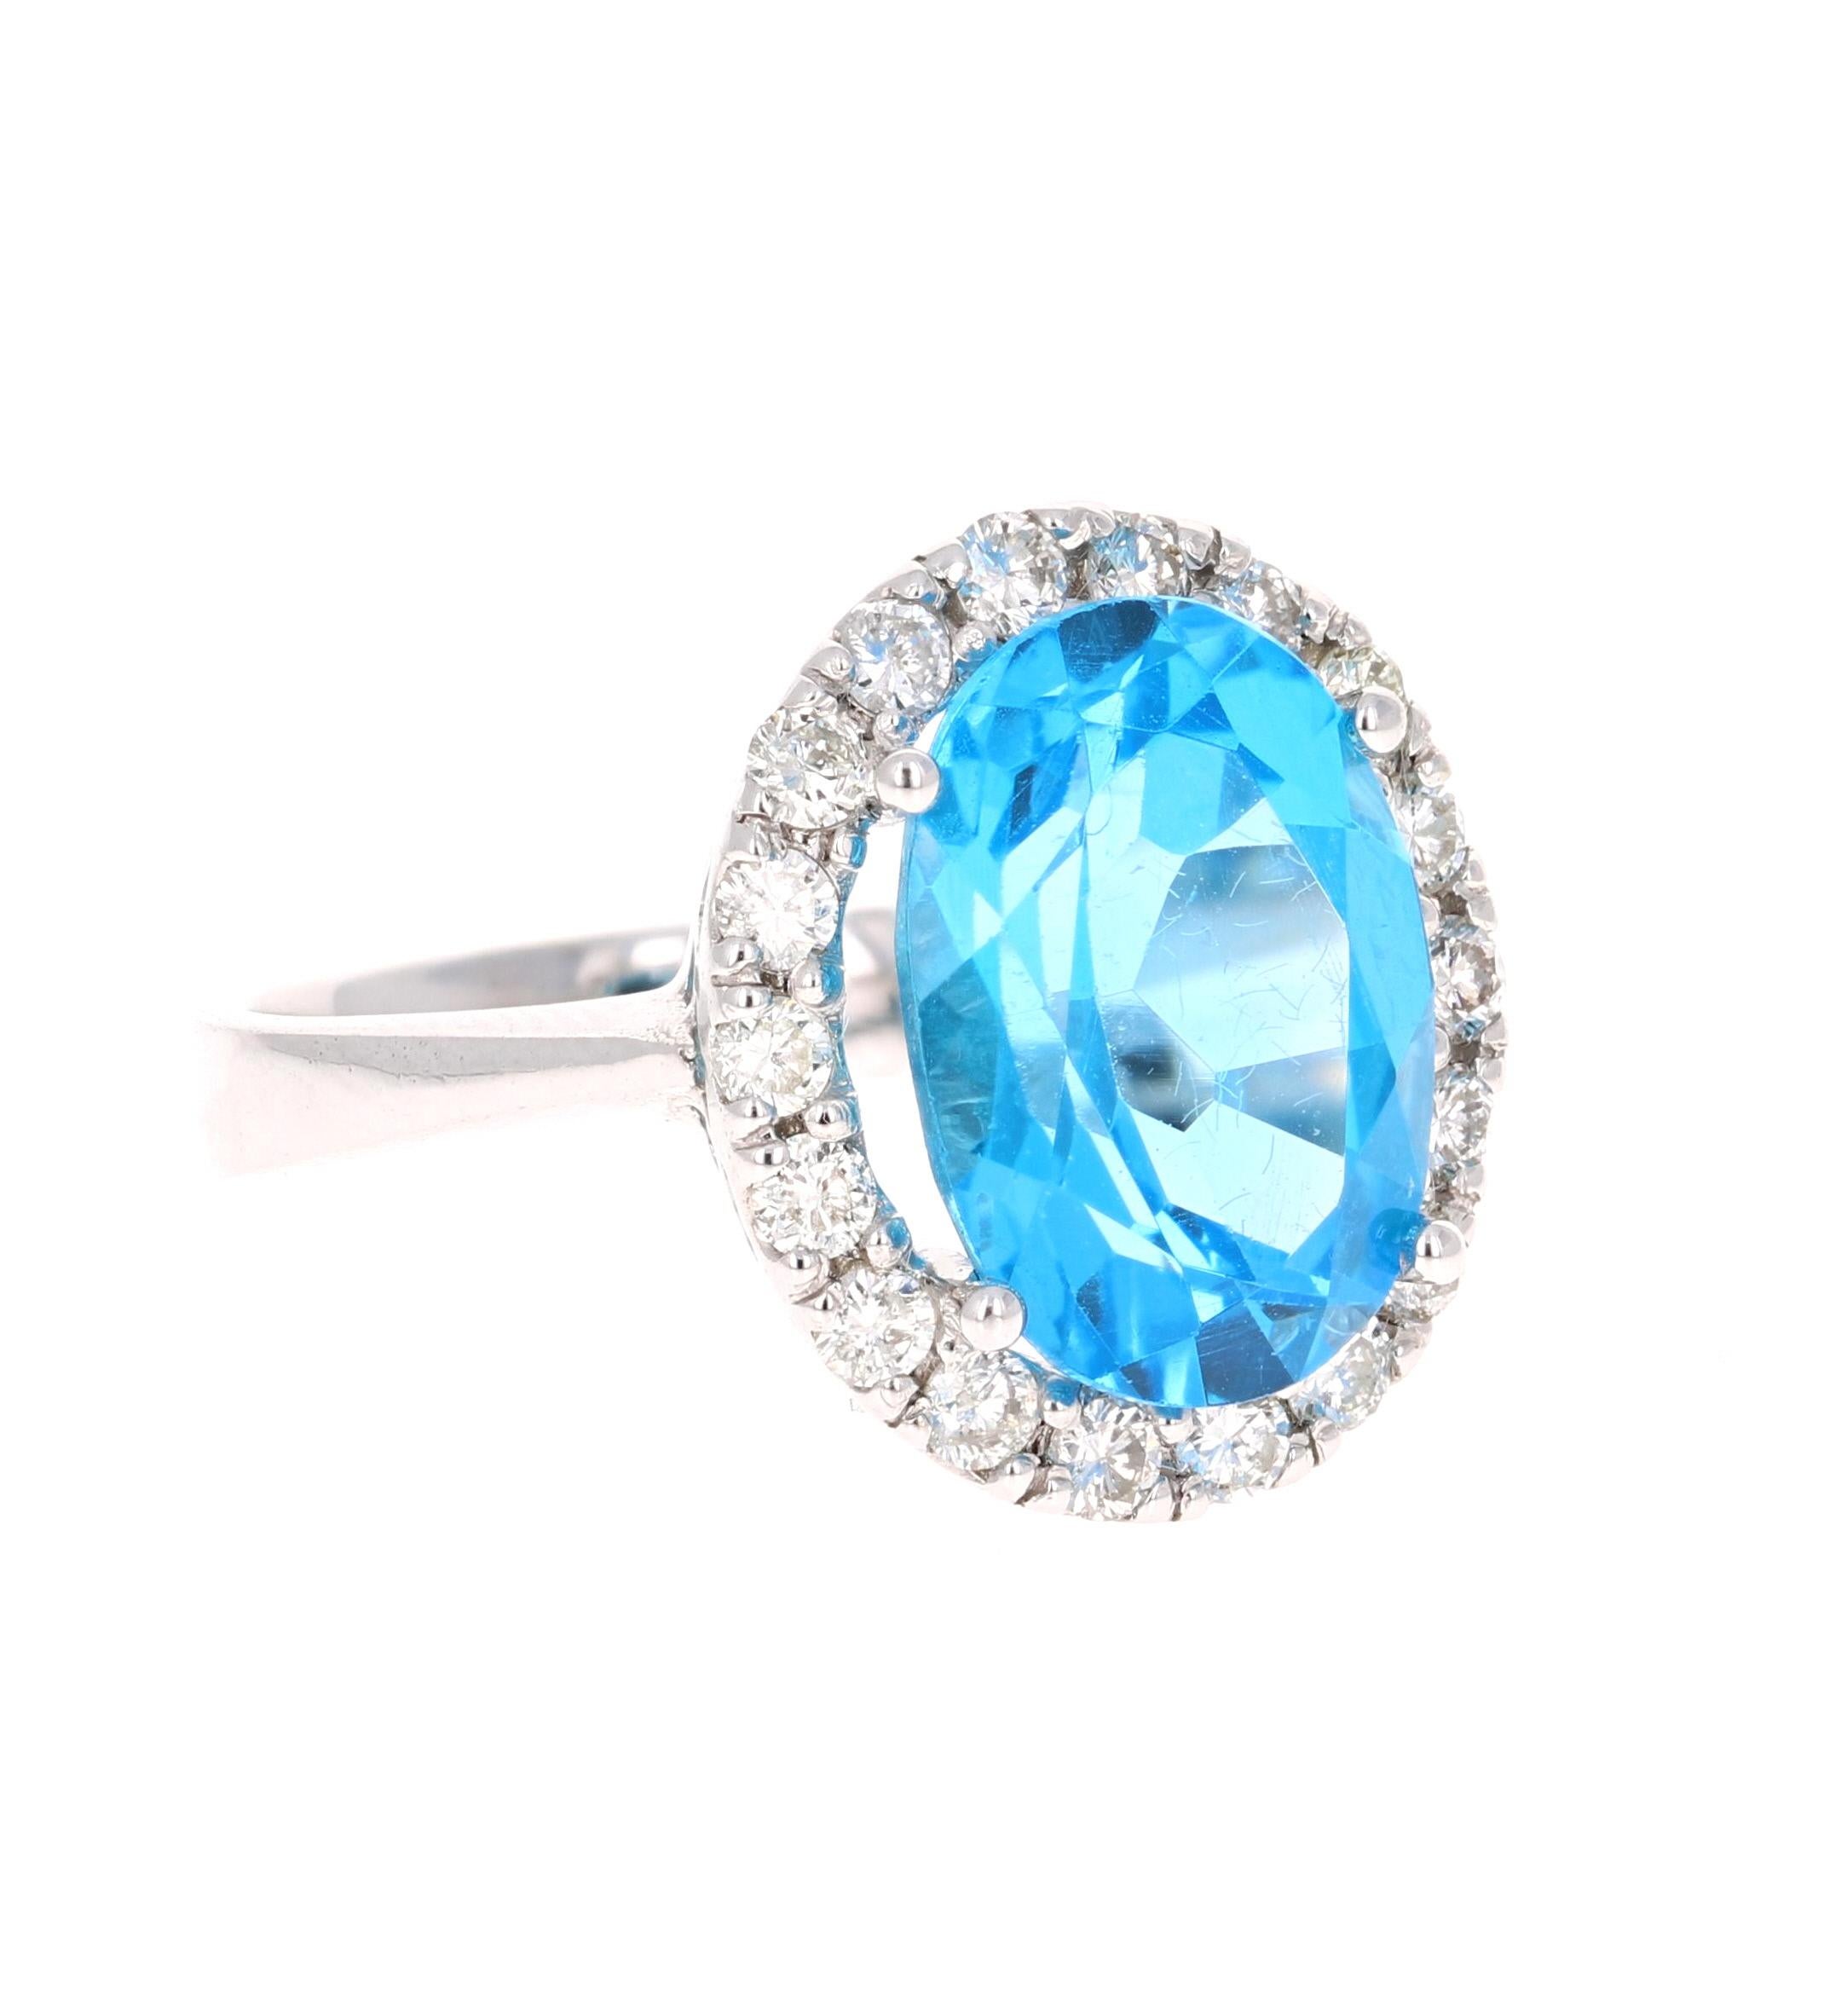 This beautiful Oval Cut Blue Topaz and Diamond ring has a stunning 7.11 Carat Blue Topaz and its surrounded by 18 Round Cut Diamonds that weigh 0.61 Carats. The clarity and color of the diamonds are VS-H. The total carat weight of the ring is 7.72